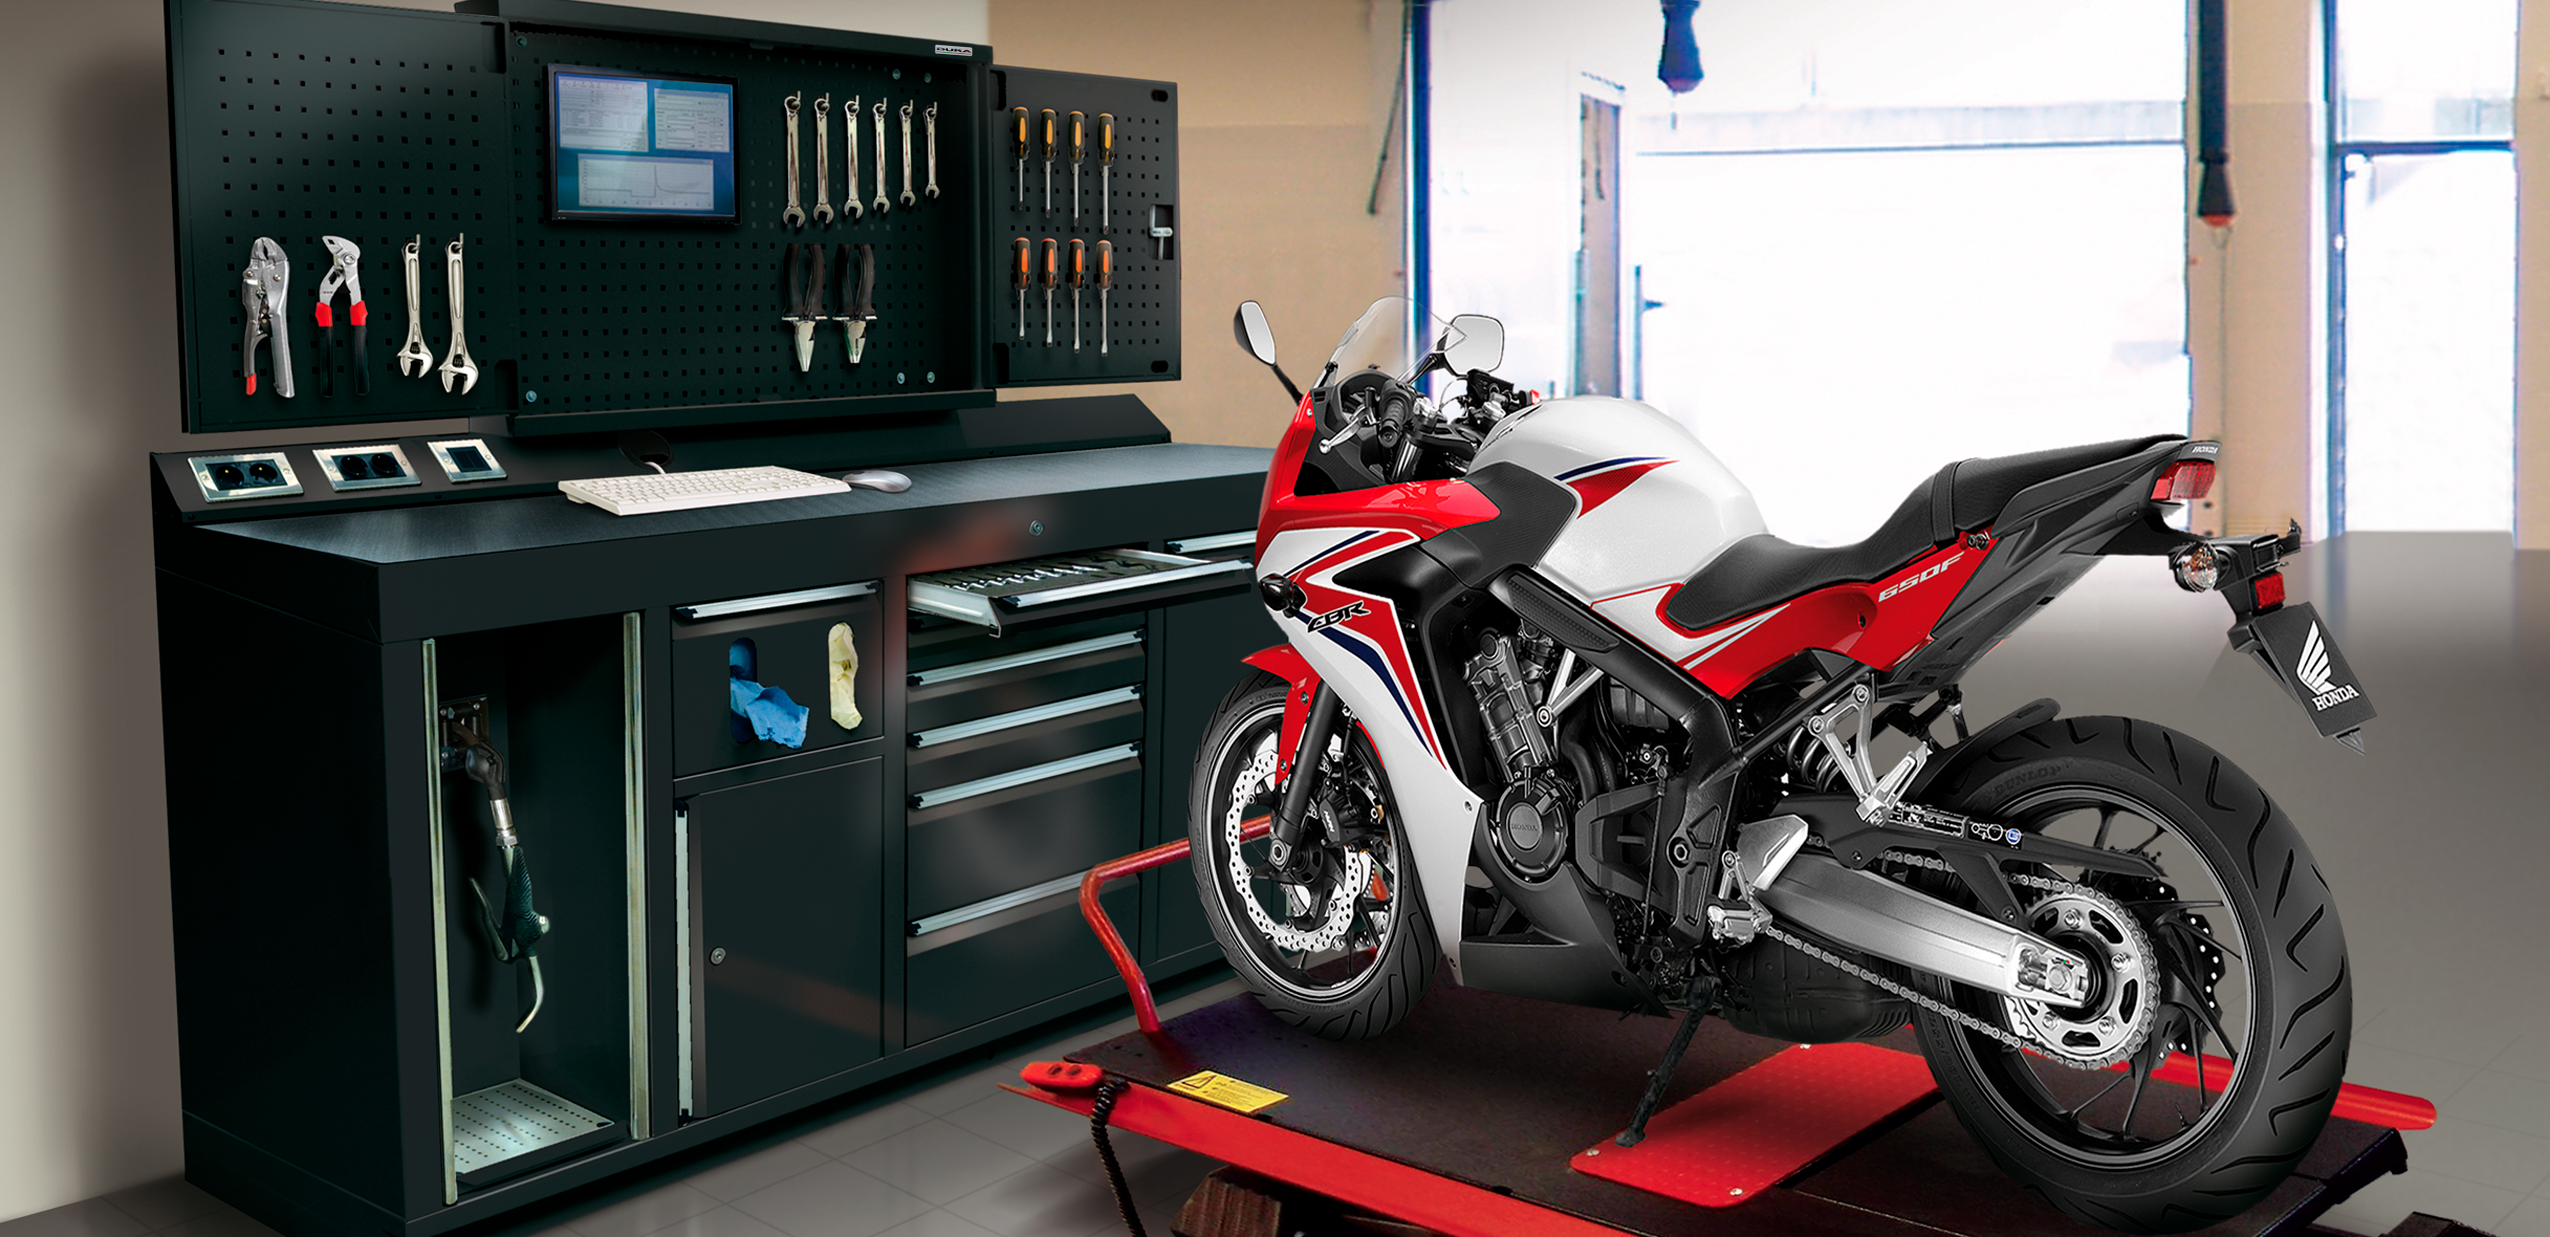 Dura ServicePod in State of the Art Motorcycle Workshop